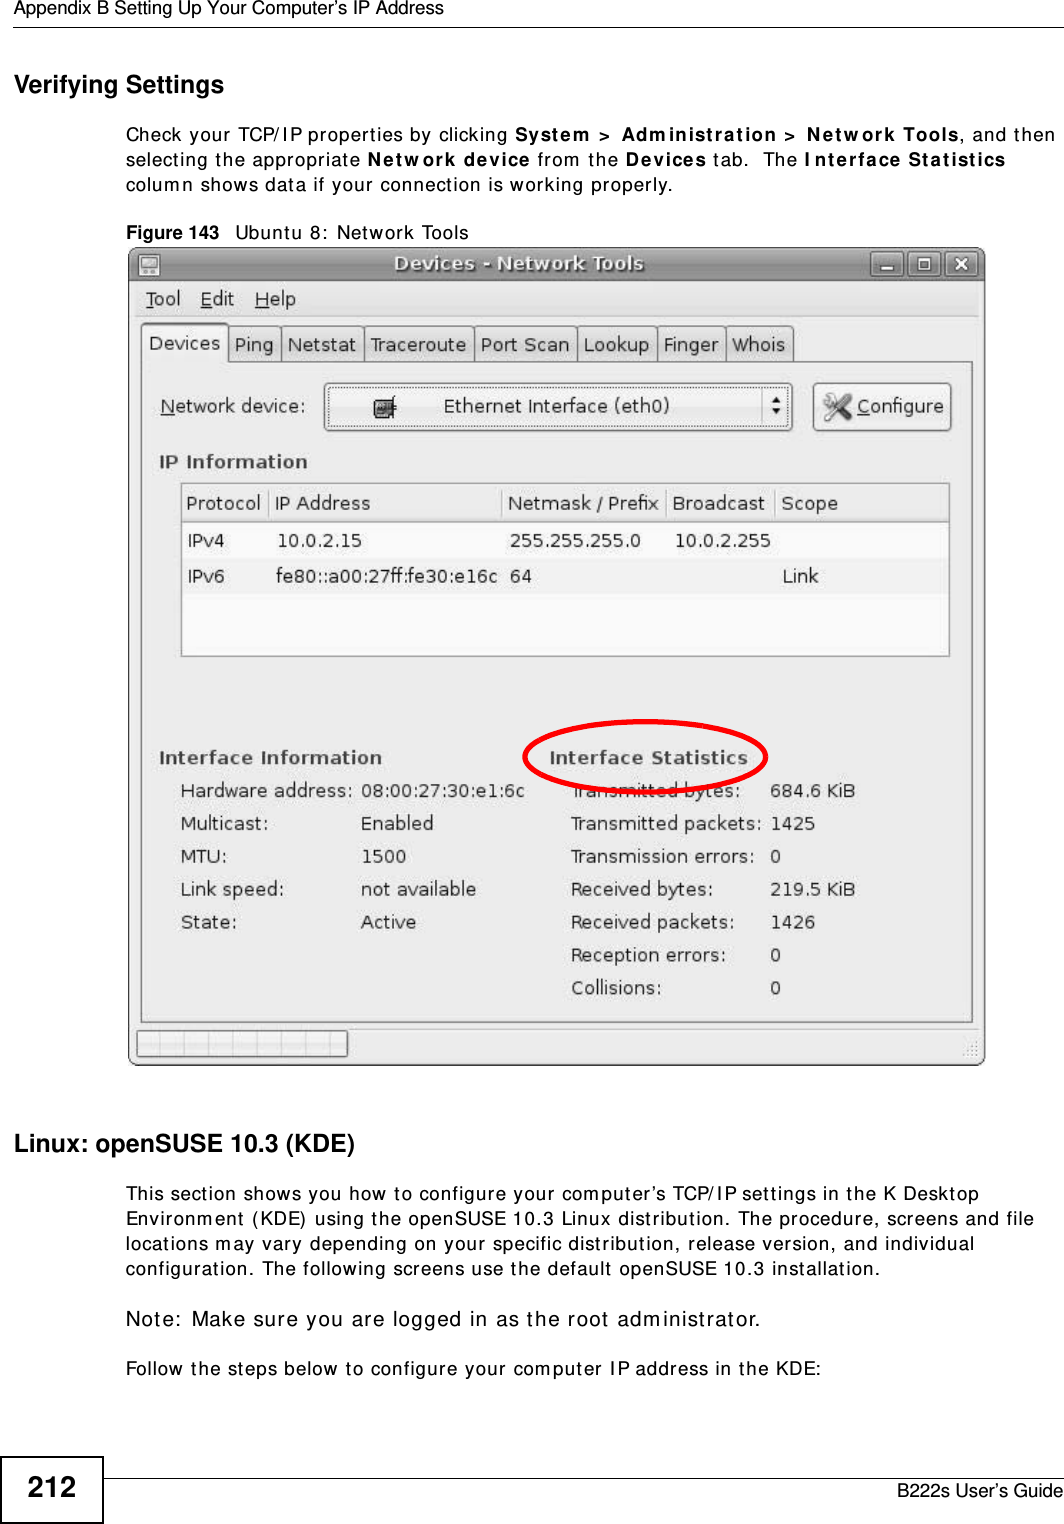 Appendix B Setting Up Your Computer’s IP AddressB222s User’s Guide212Verifying SettingsCheck your TCP/ I P pr operties by clicking Syst em  &gt;  Adm inist r a tion &gt;  N et w or k  Tools, and then select ing t he appropriat e N et w or k  device fr om  the De vices t ab.  The I nt er face St a t ist ics colum n shows dat a if your connection is working properly.Figure 143   Ubunt u 8:  Network ToolsLinux: openSUSE 10.3 (KDE)This sect ion shows you how to configur e your com puter’s TCP/ I P sett ings in t he K Deskt op Envir onm ent ( KDE)  using t he openSUSE 10.3 Linux dist ribution. The procedure, screens and file locations m ay vary depending on your specific distribut ion, release version, and individual configurat ion. The following screens use t he default  openSUSE 10.3 installat ion.Not e:  Make sure you are logged in as the root  adm inistrat or. Follow t he steps below t o configure your  com puter I P address in t he KDE: